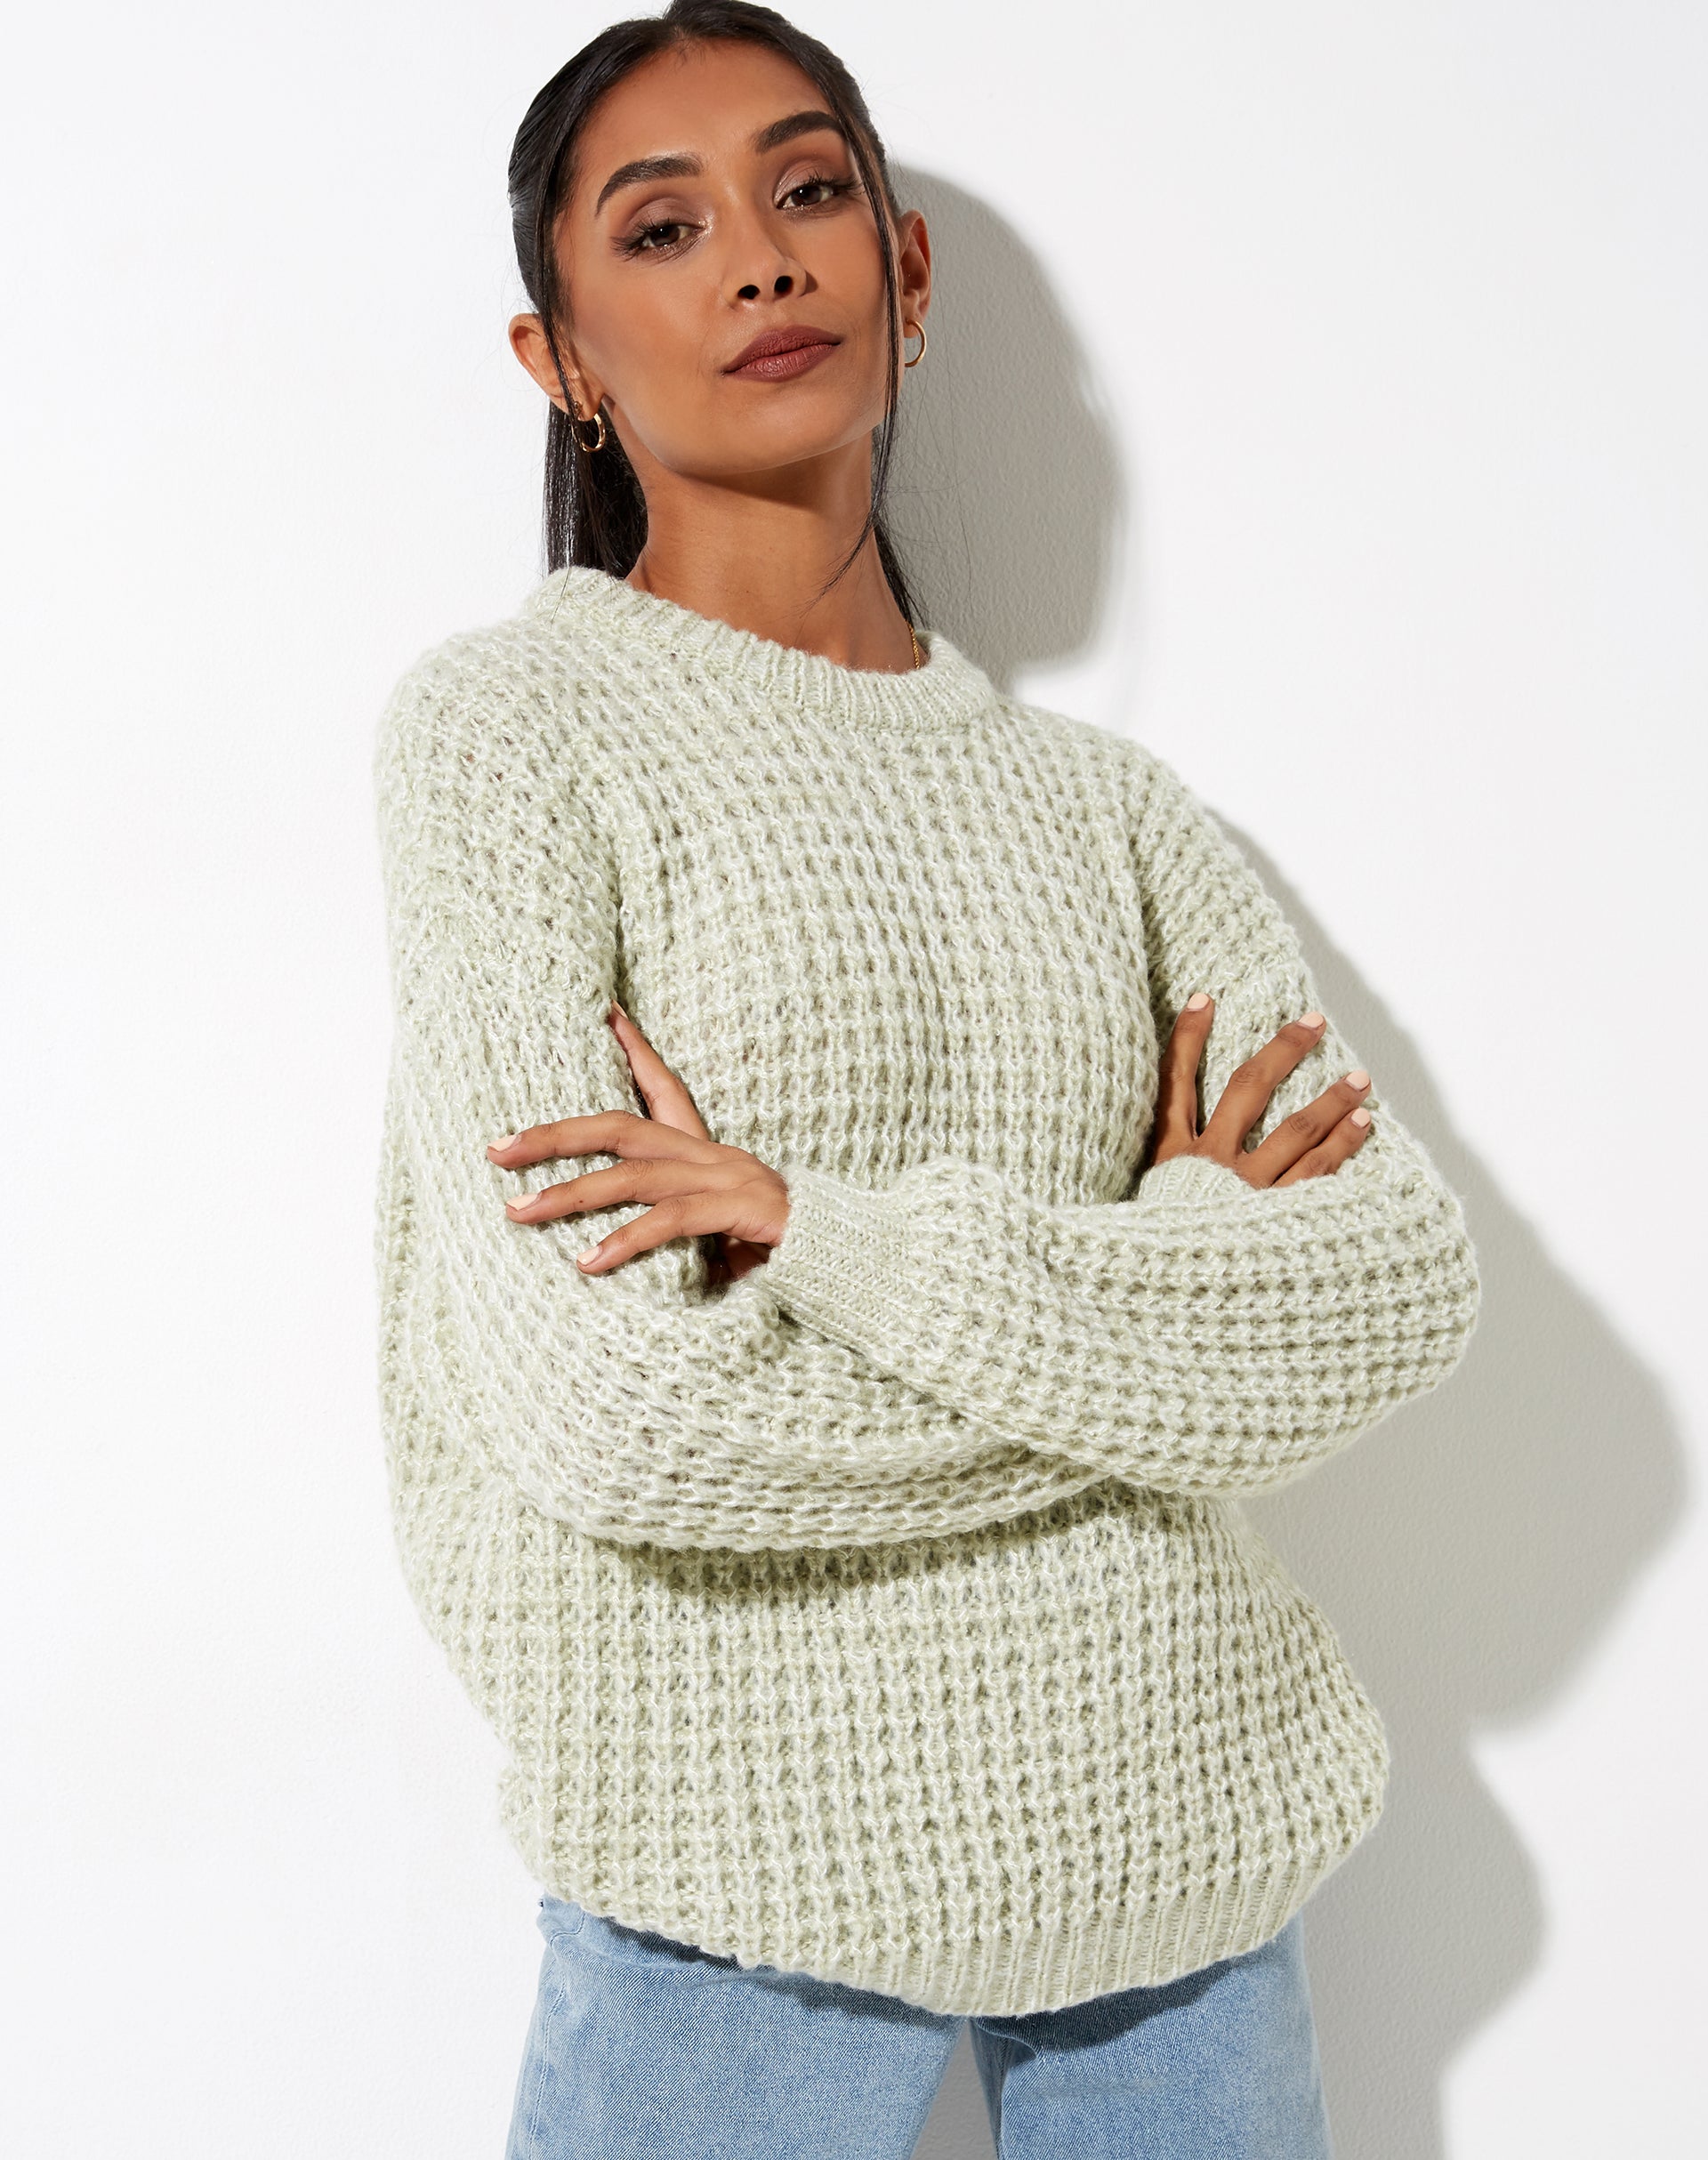 Image of Caribou Jumper in Chunky Knit Mint